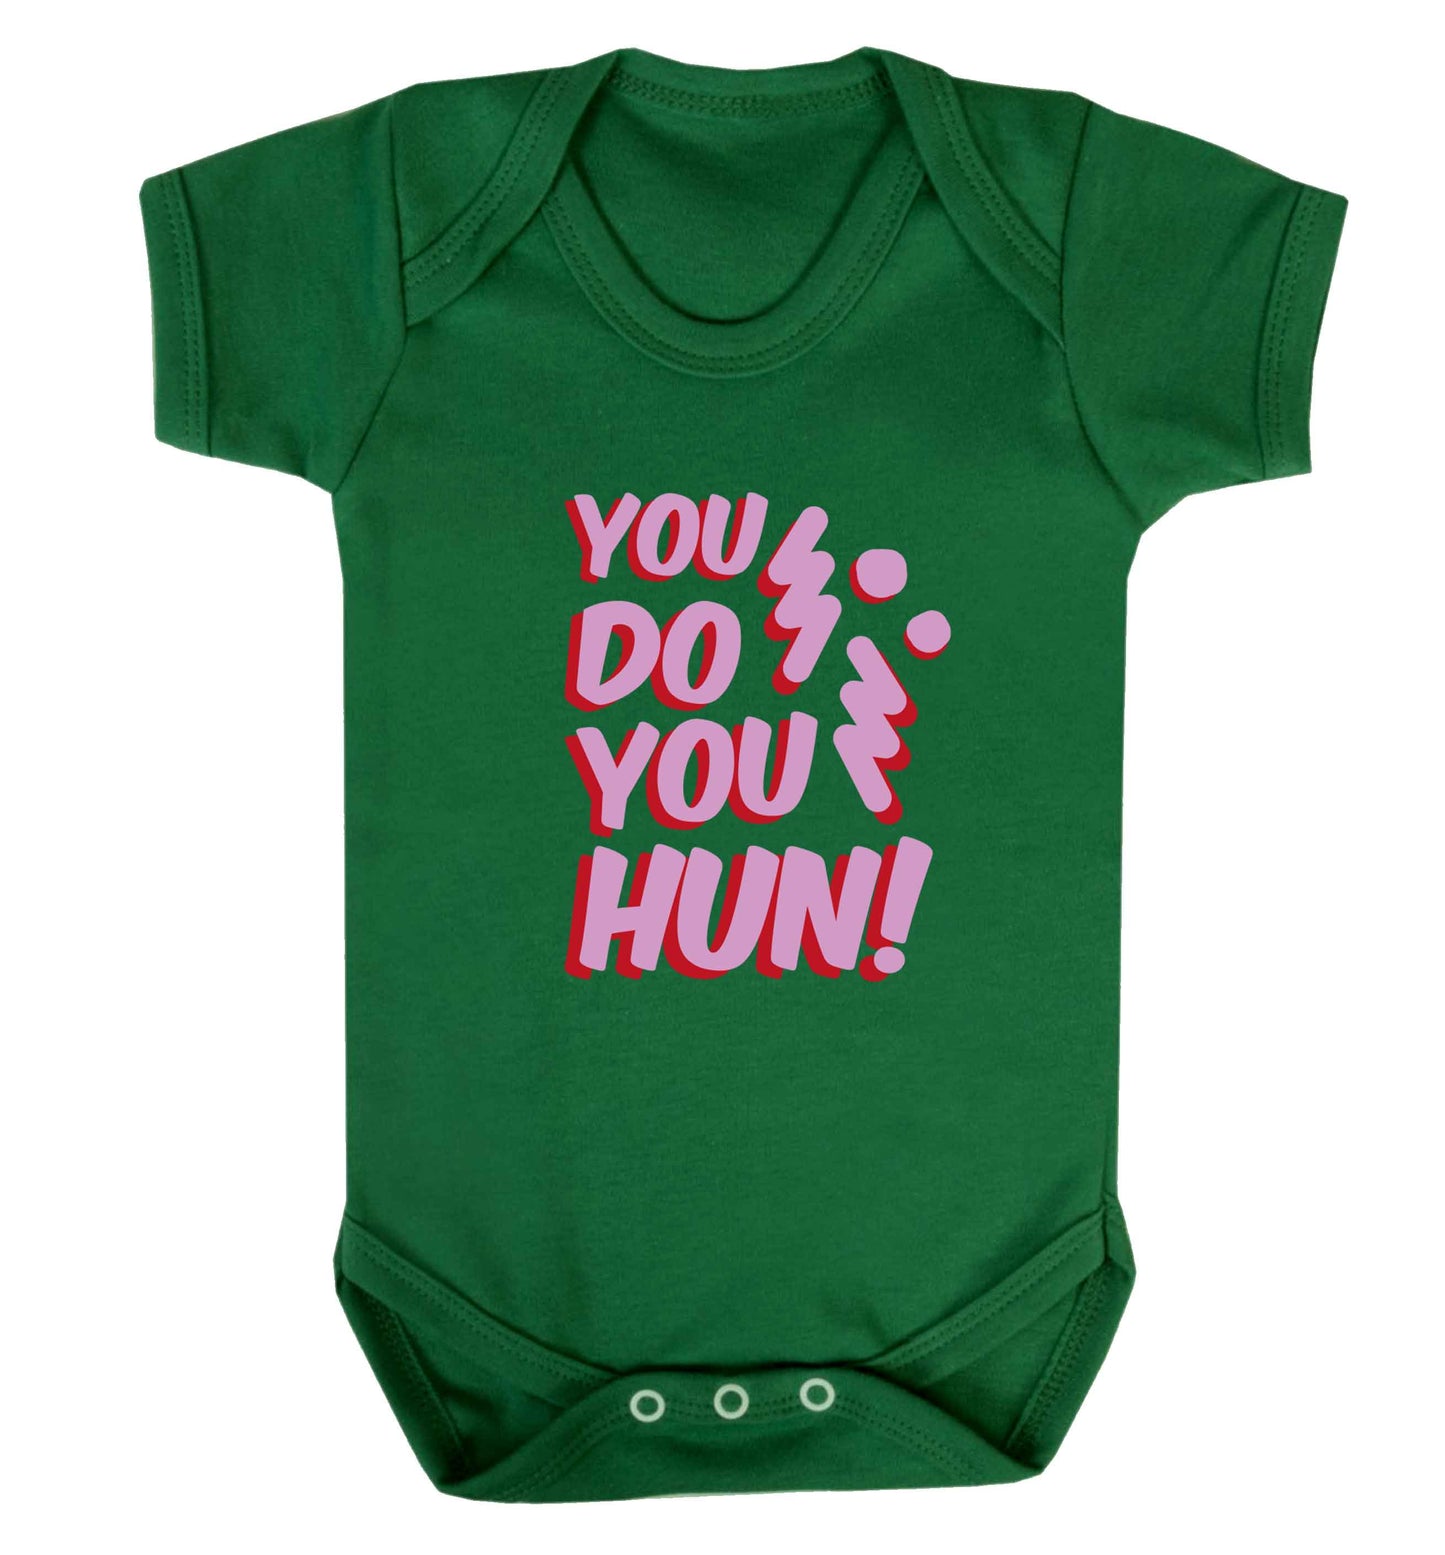 You do you hun baby vest green 18-24 months